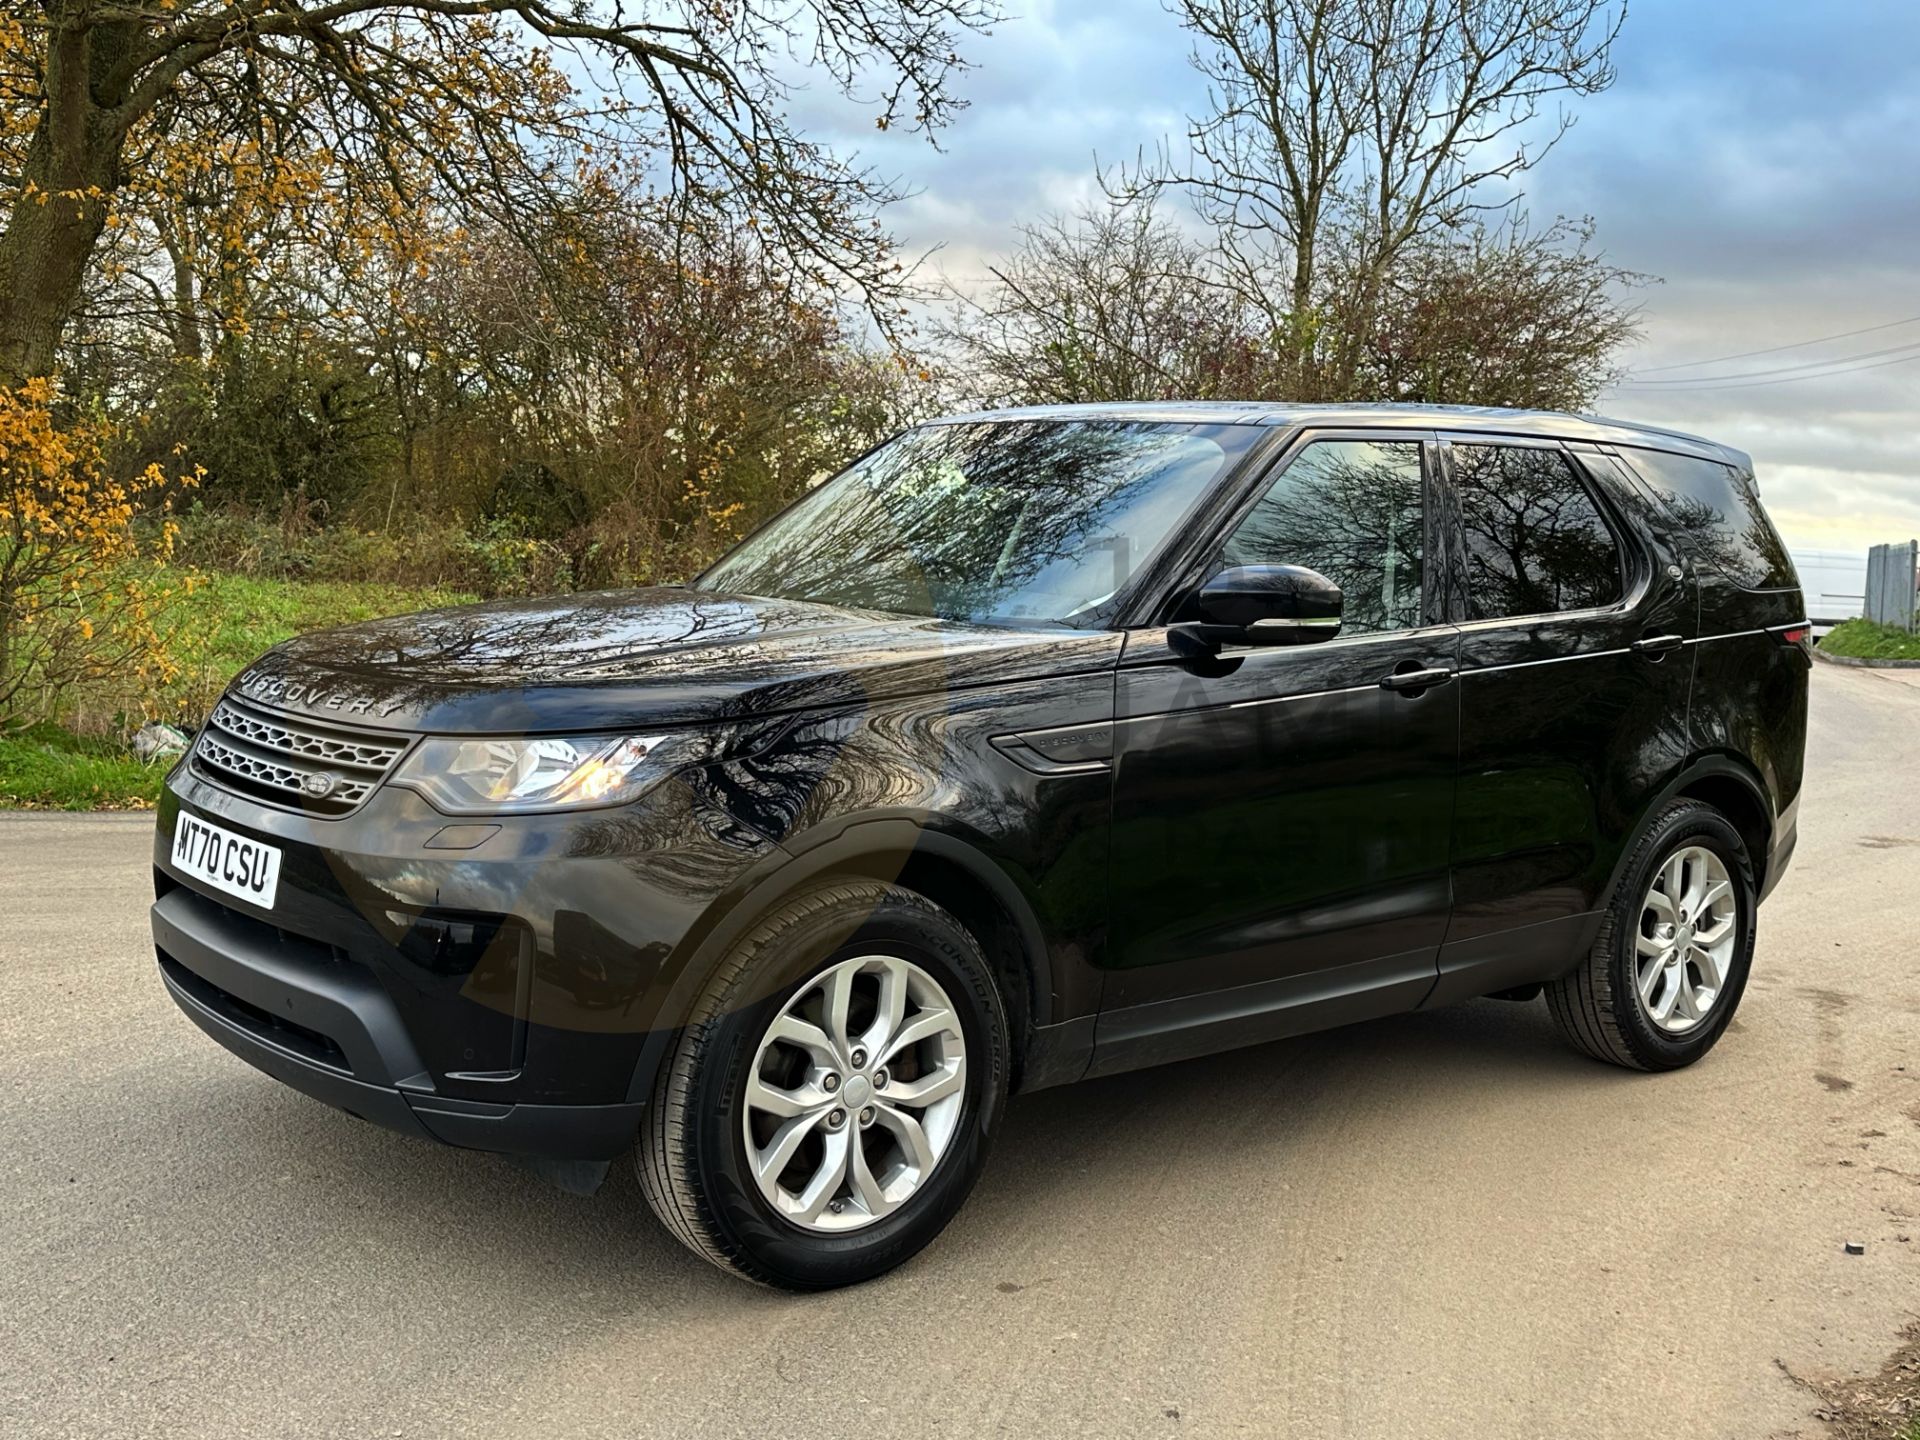 LAND ROVER DISCOVERY 5 *ALL NEW MODEL* (2021 - EURO 6) 8 SPEED AUTO (1 OWNER) *ONLY 19,000 MILES* - Image 7 of 50